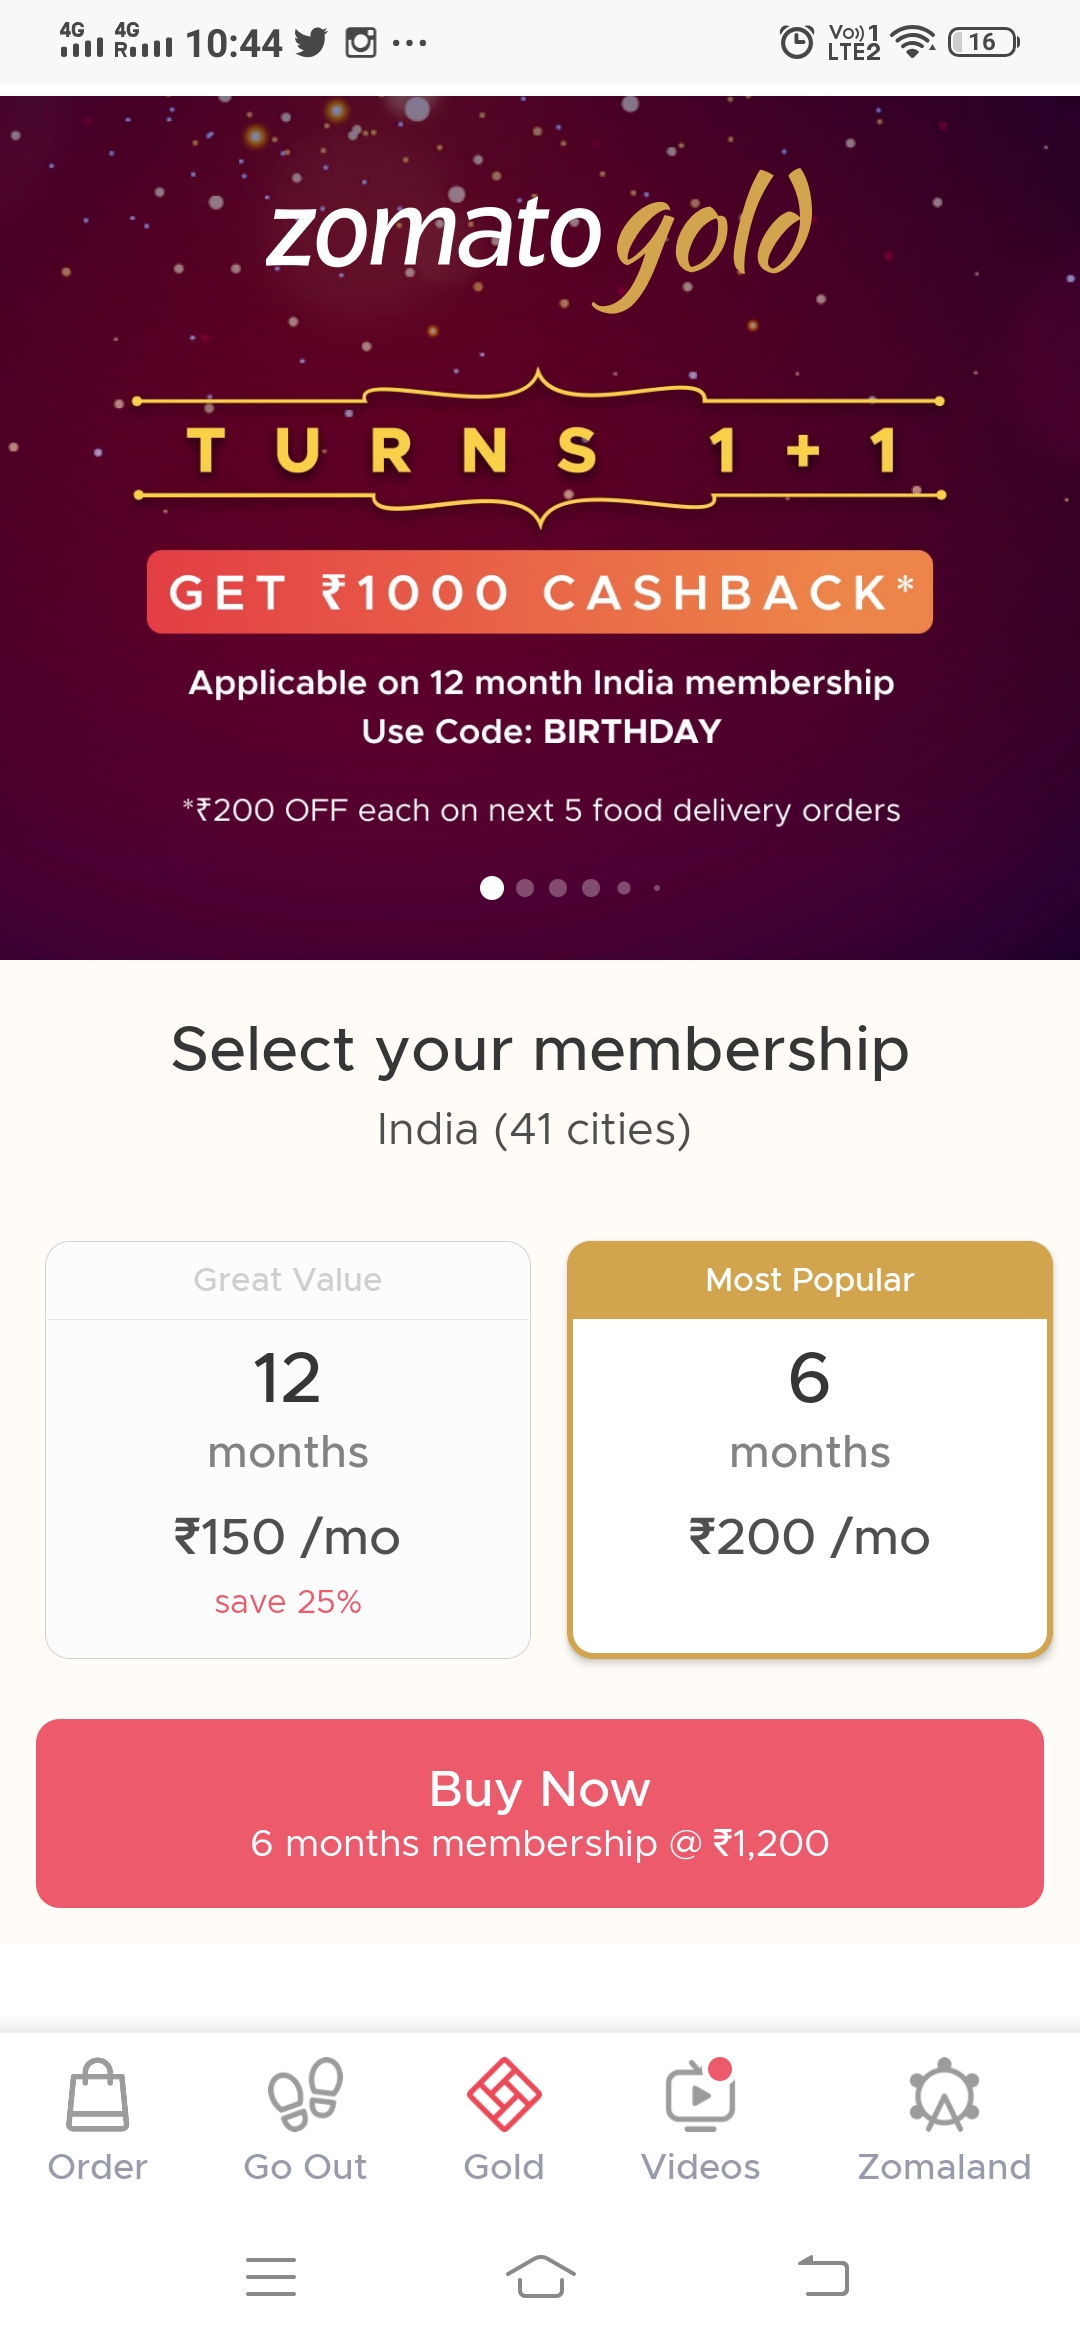 Coupon Code For Zomato Gold Membership